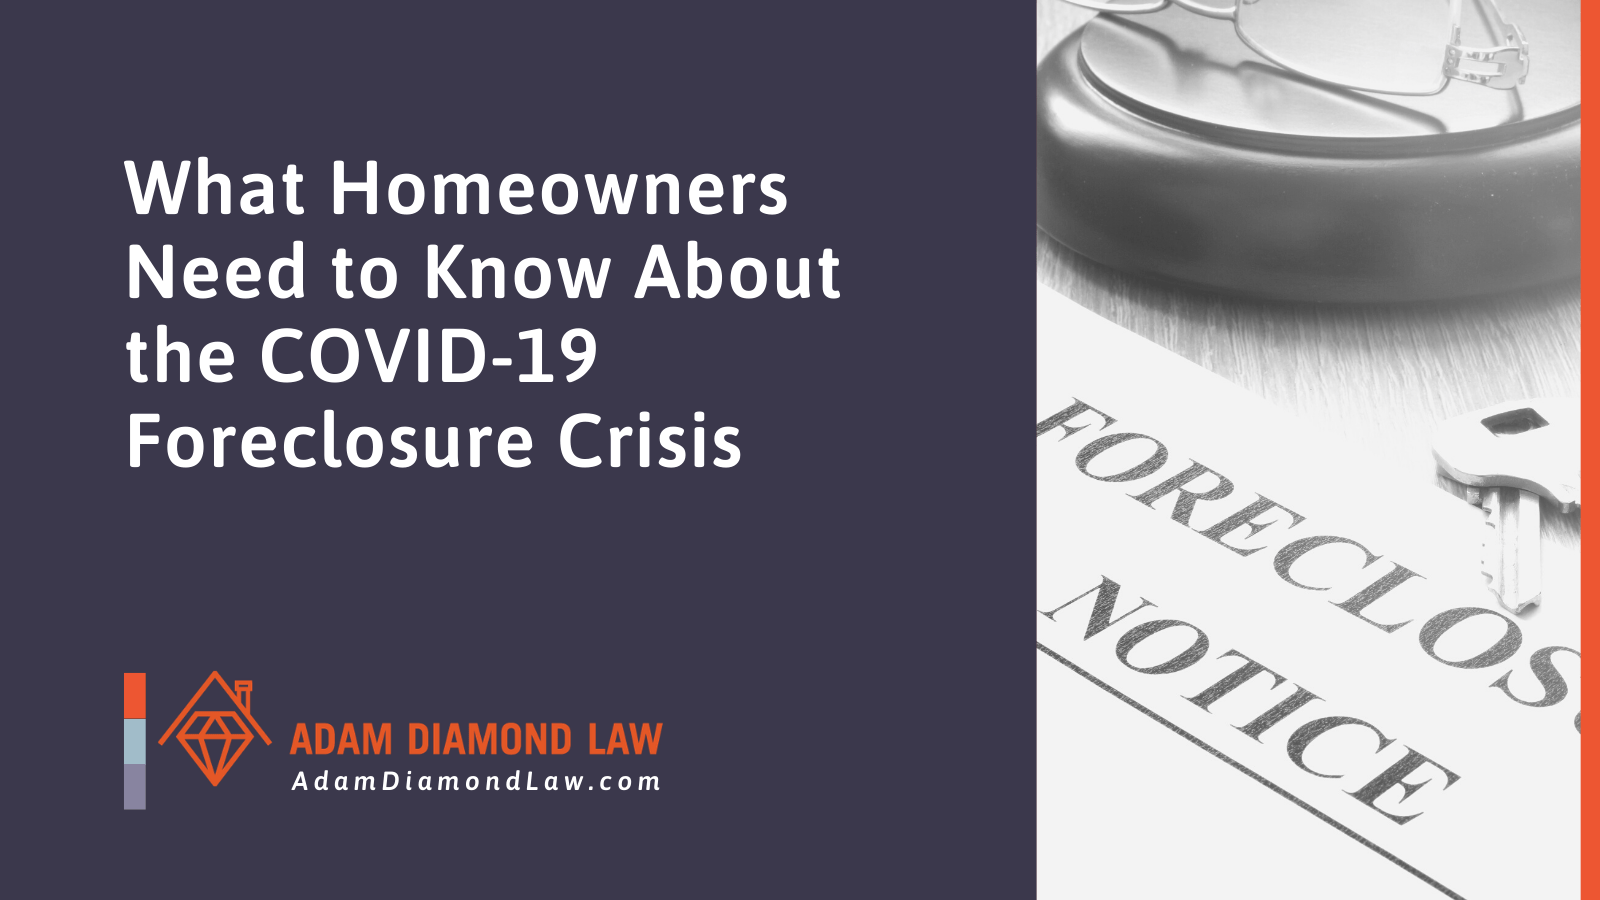 What Homeowners Need to Know About the COVID-19 Foreclosure Crisis - Adam Diamond Law | McHenry, IL Residential Real Estate Lawyer